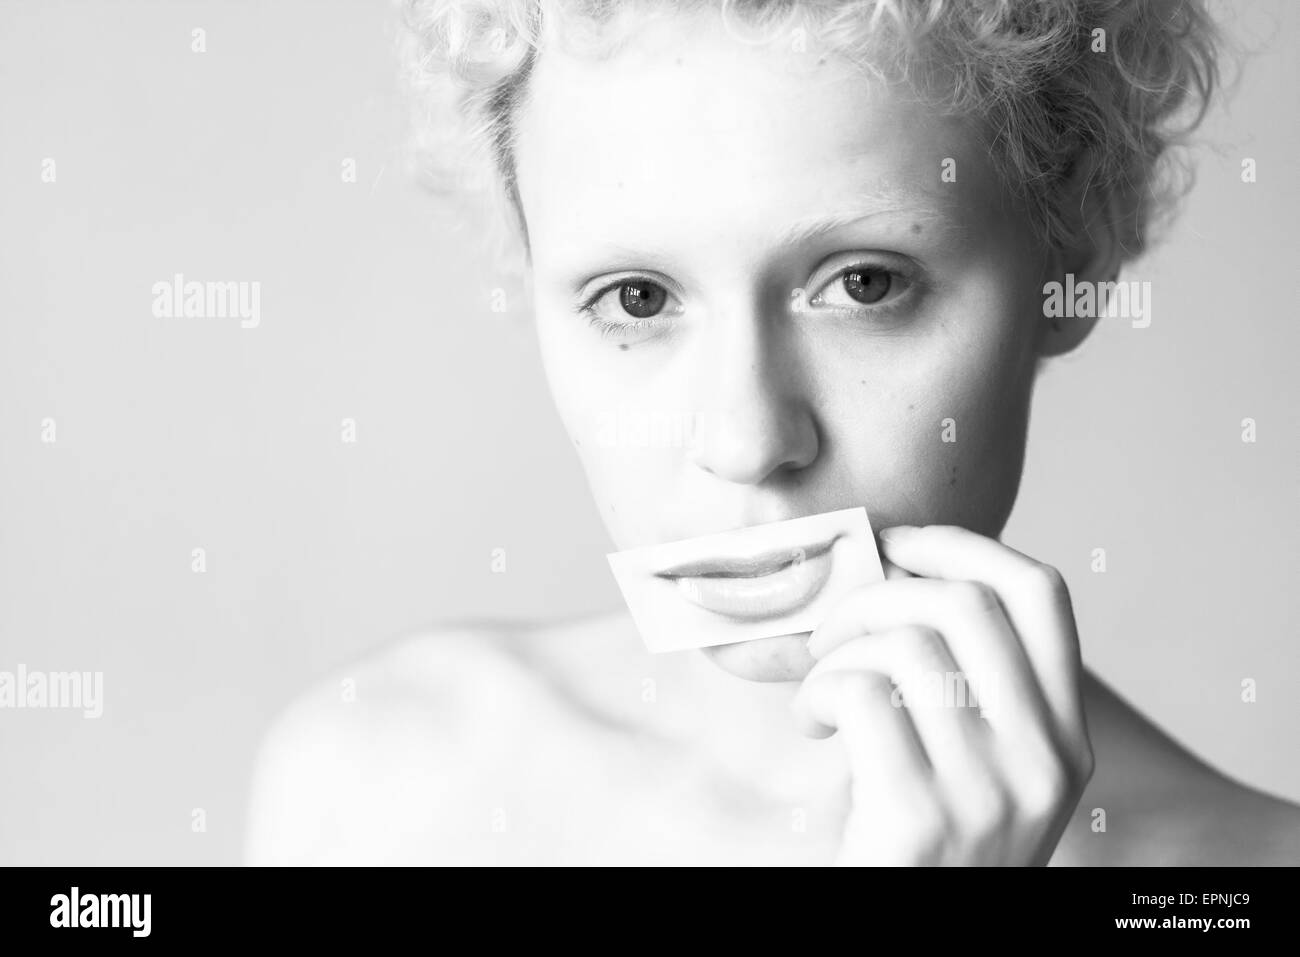 Tender young girl closes her lips to picture painted lips. Black and white photography in bright colors. Stock Photo